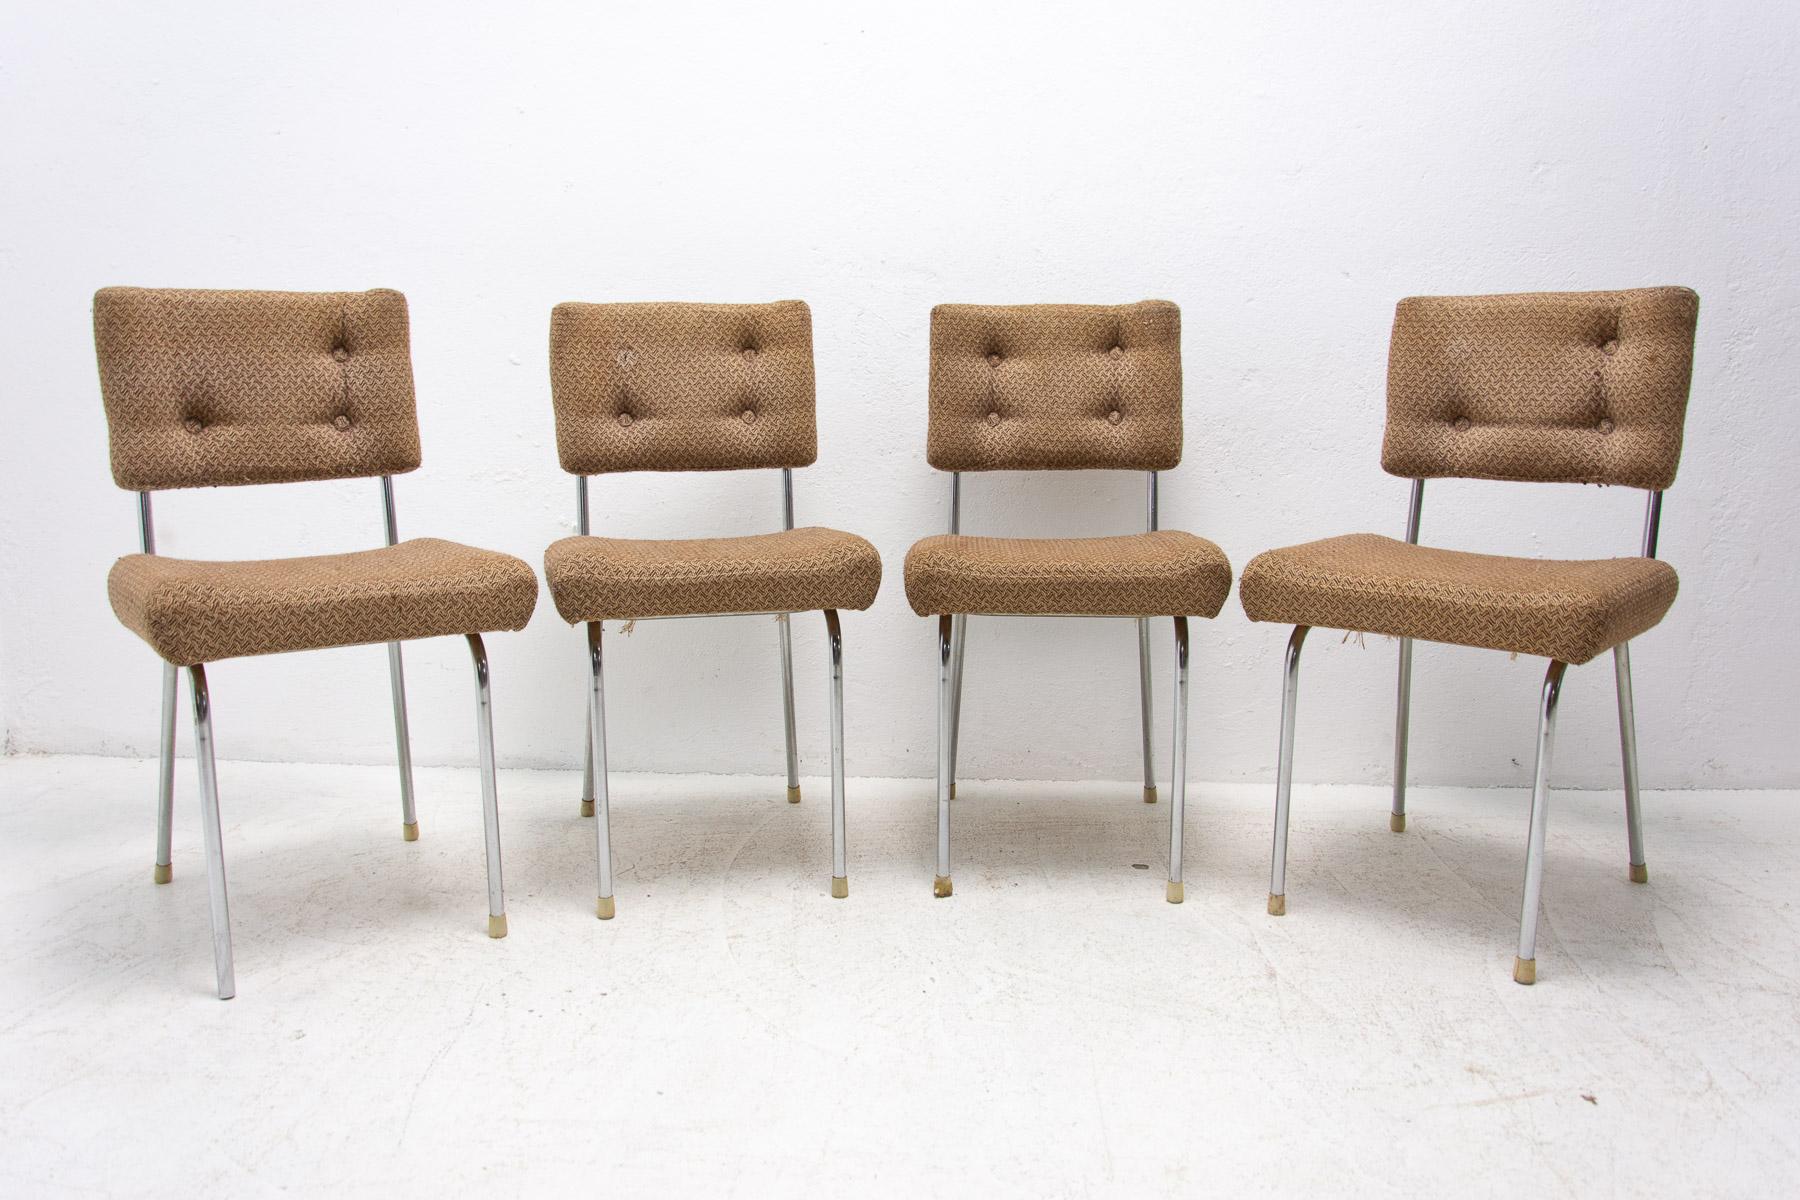 Mid century cafe or dining chairs with chrome legs. It was made in the former Czechoslovakia in the 1960’s. The chairs are structurally in good Vintage condition, the upholstery shows signs of age and using(missing knobs). Price is for the set of